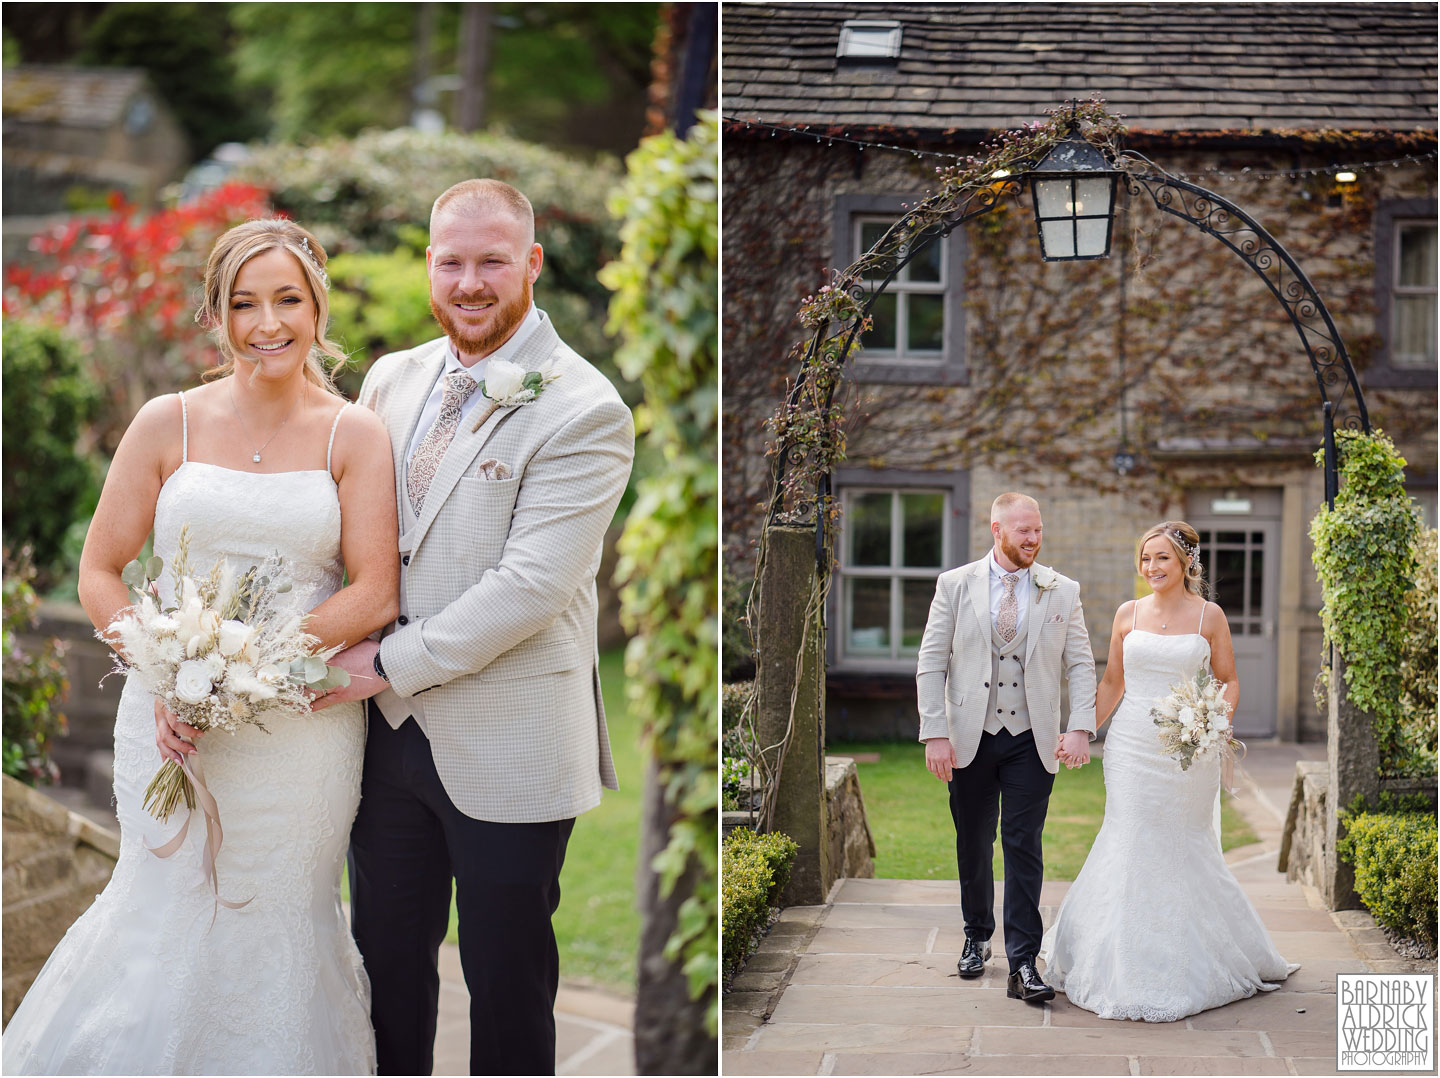 Wedding photography at The Fleece in Ripponden